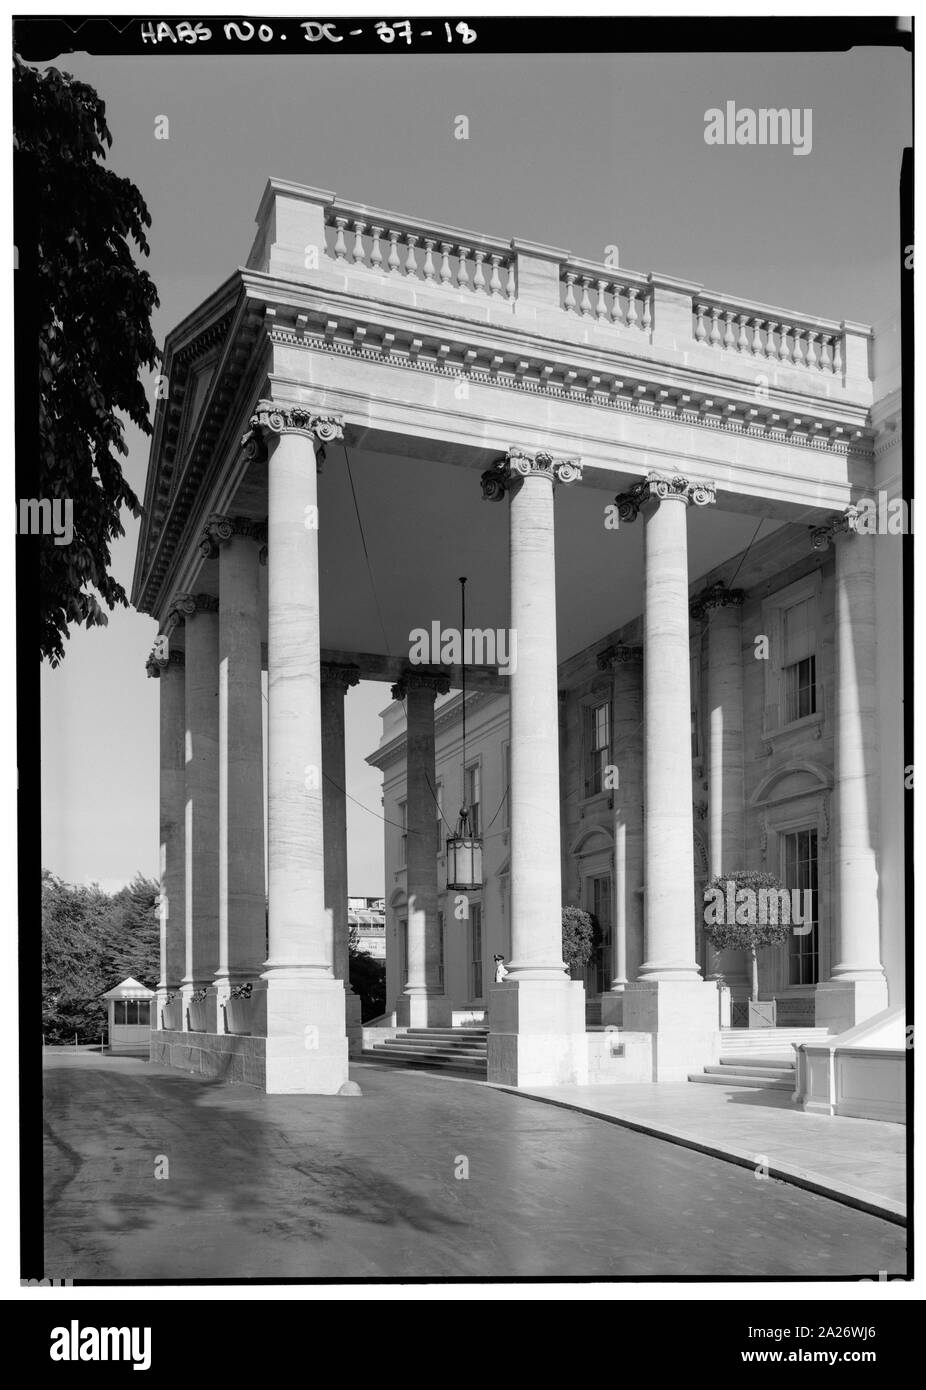 GENERAL VIEW OF WEST SIDE OF PORTICO; 18. PORTICO FROM NORTHWEST HABS DC,WASH,134-18; Stock Photo